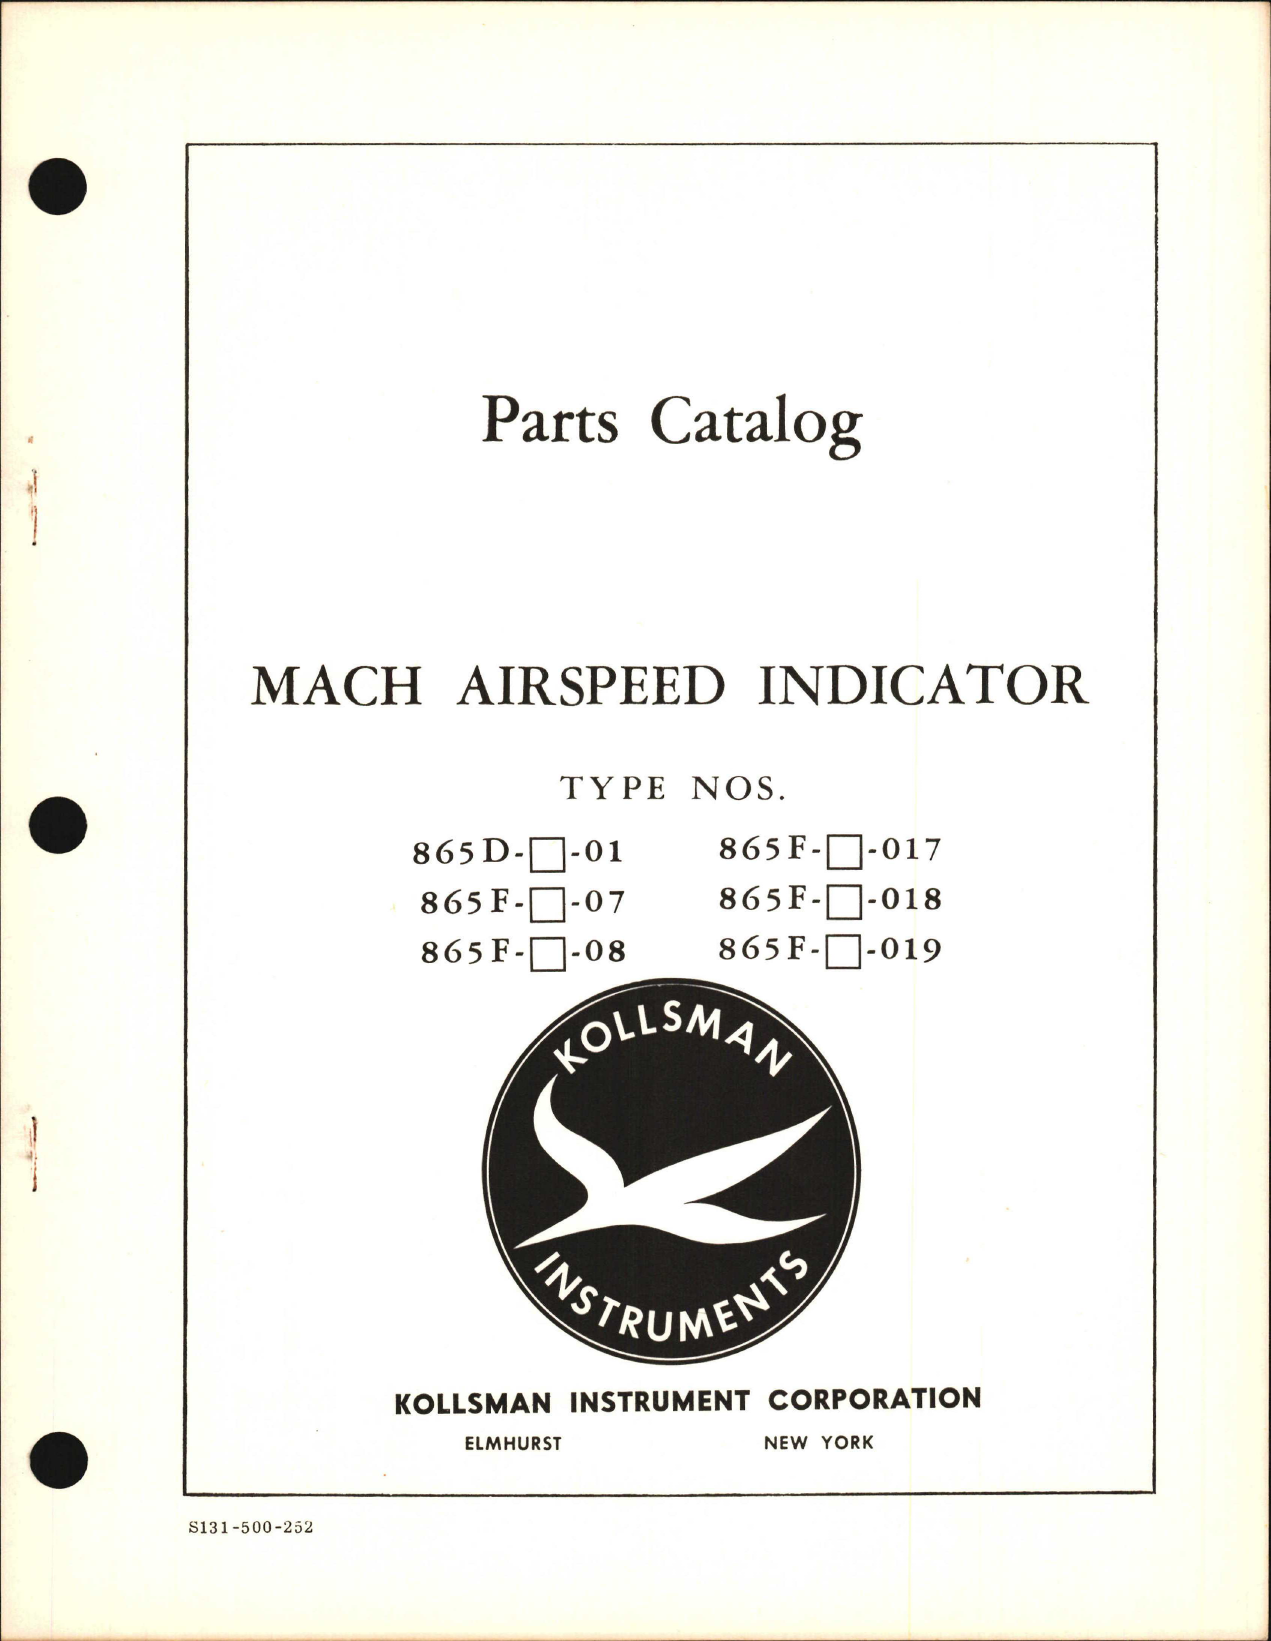 Sample page 1 from AirCorps Library document: Parts Catalog for Kollsman Mach Airspeed Indicator